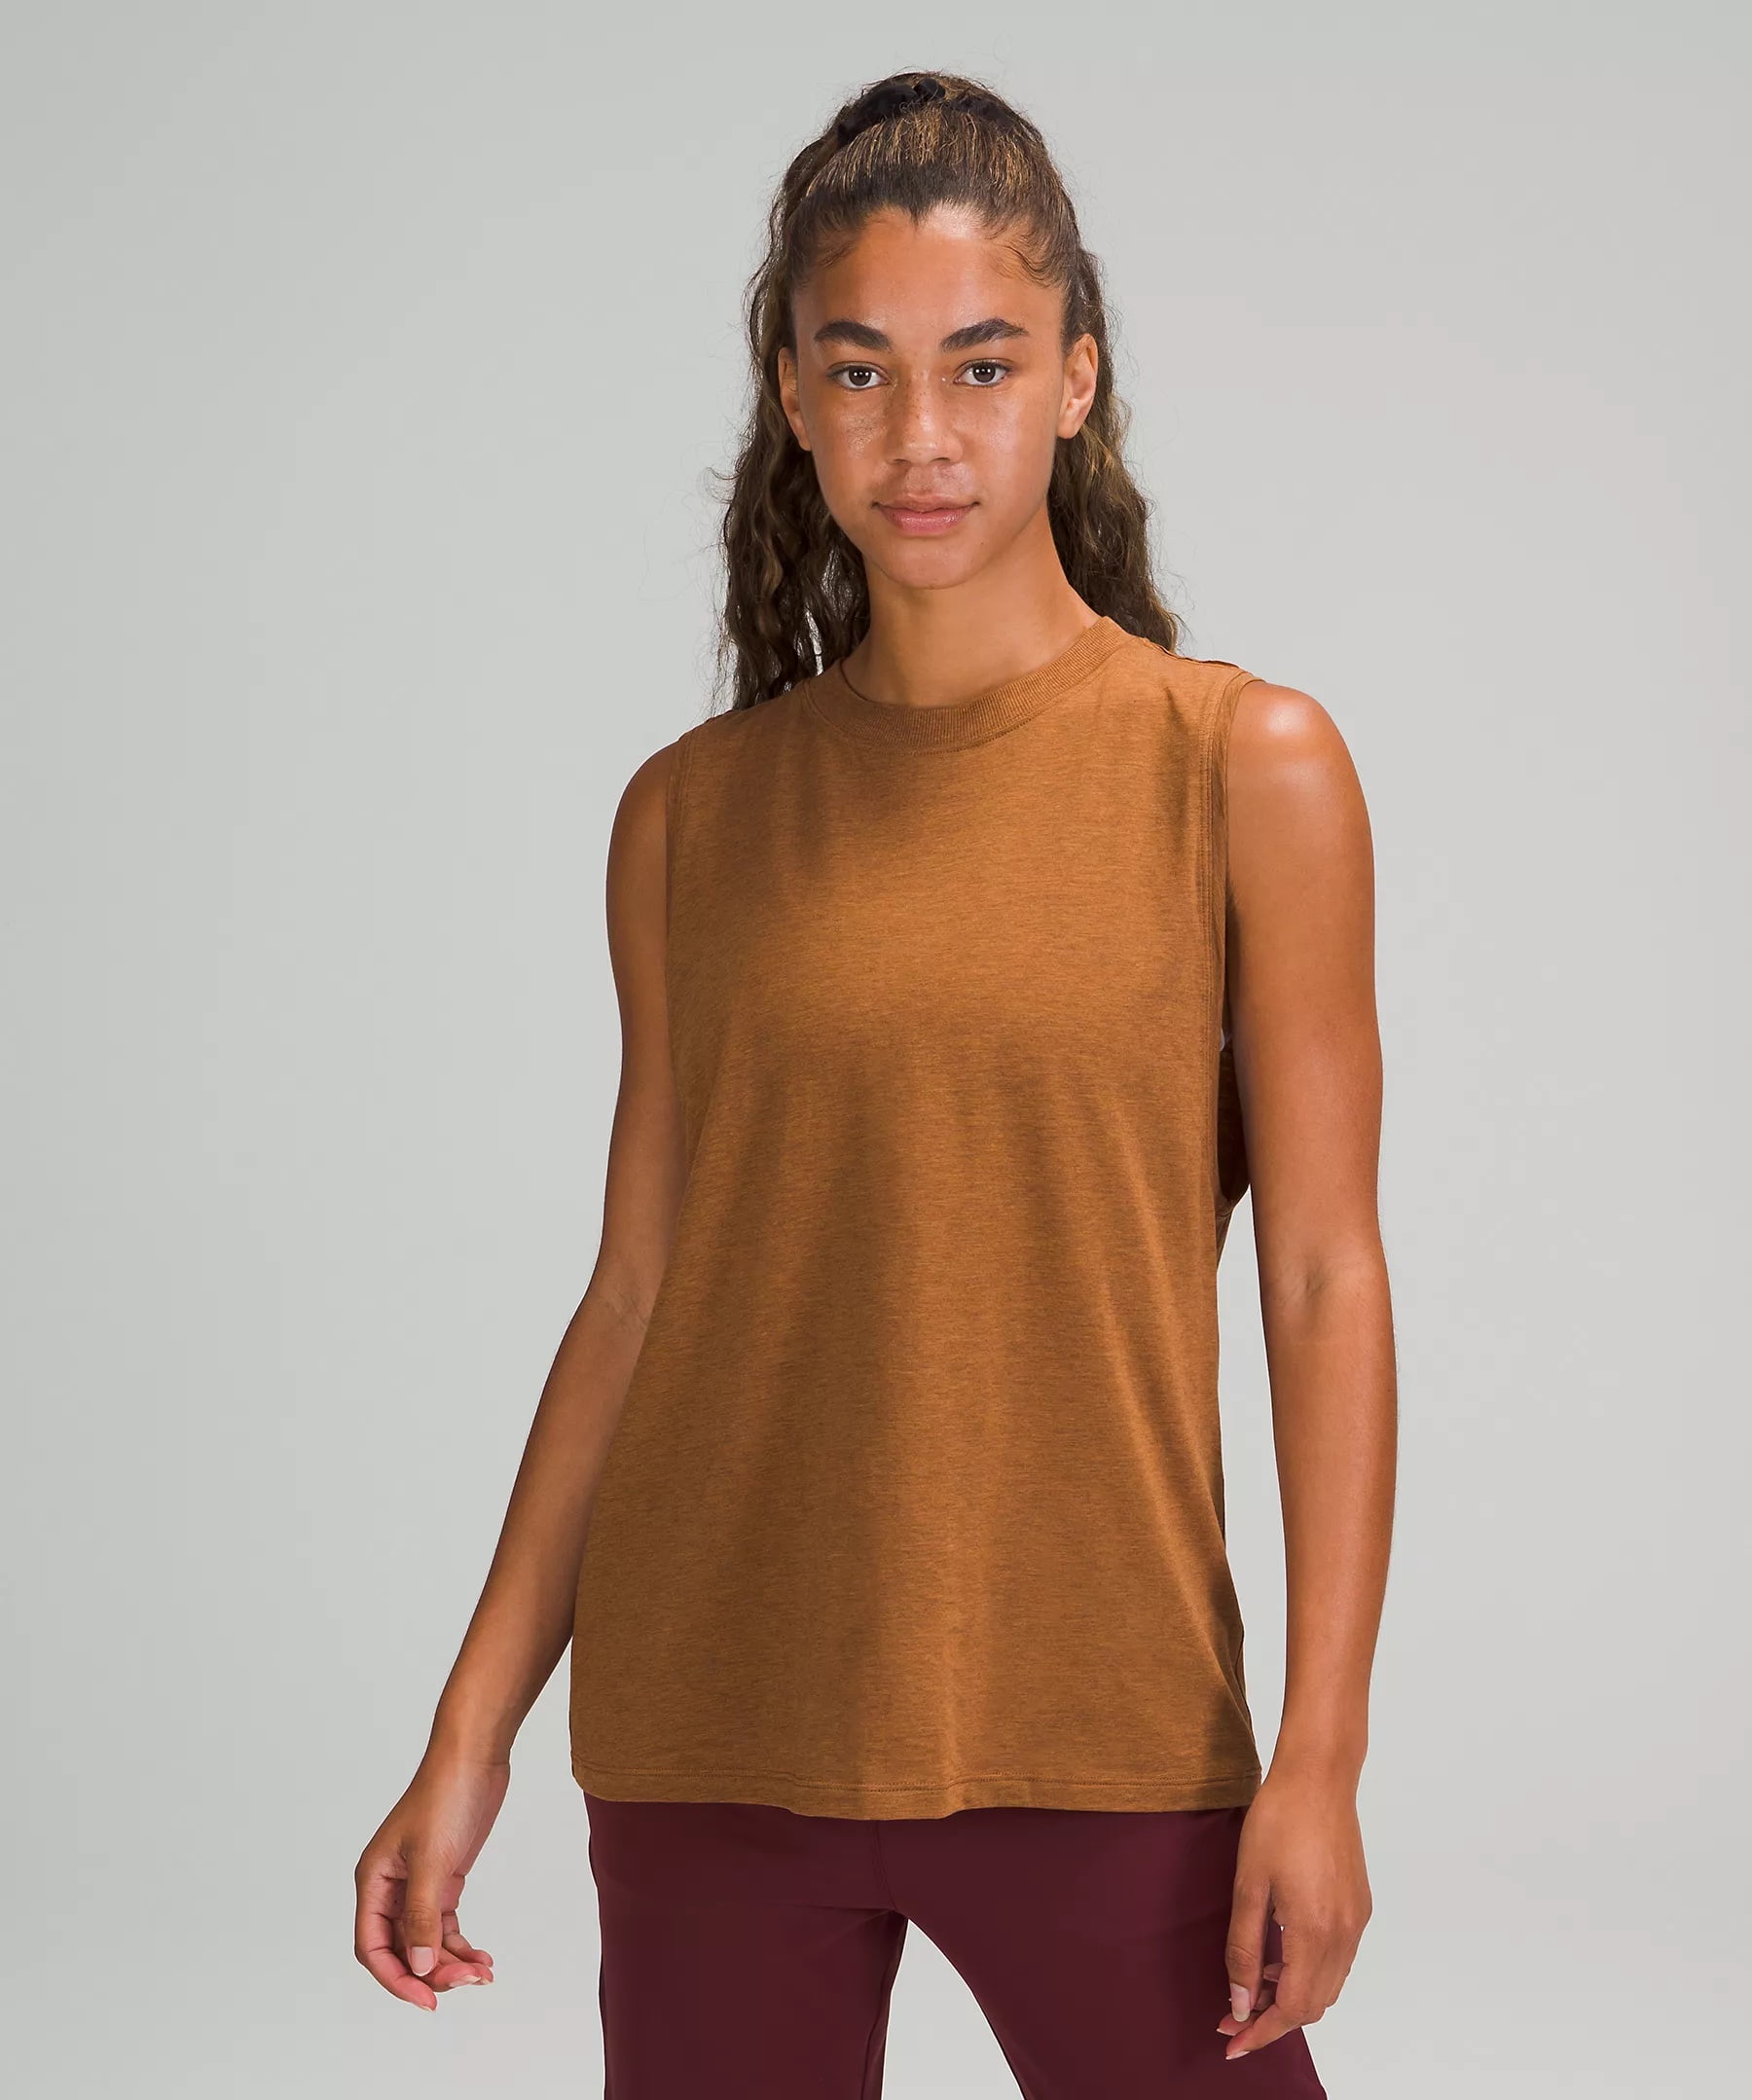 All Yours Tank Top heathered copper brown